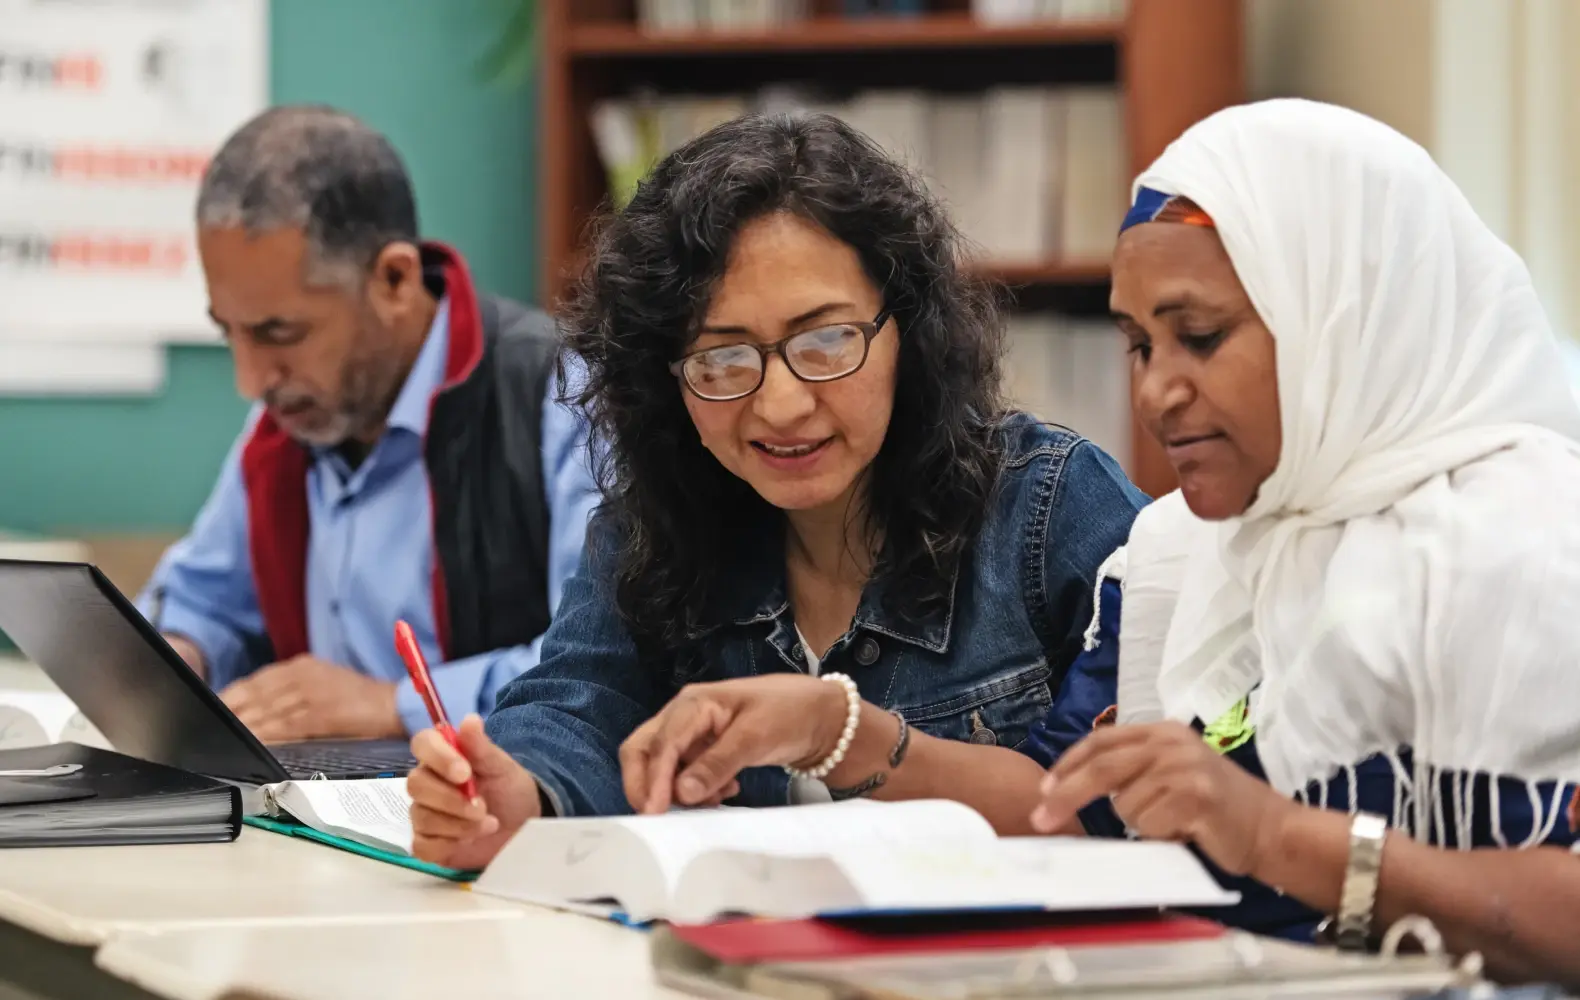 A female teacher with curly hair and glasses sits between two adult learners in an ESL classroom. The teacher reviews an open book with the learner in the foreground, a middle-aged woman wearing a hijab.